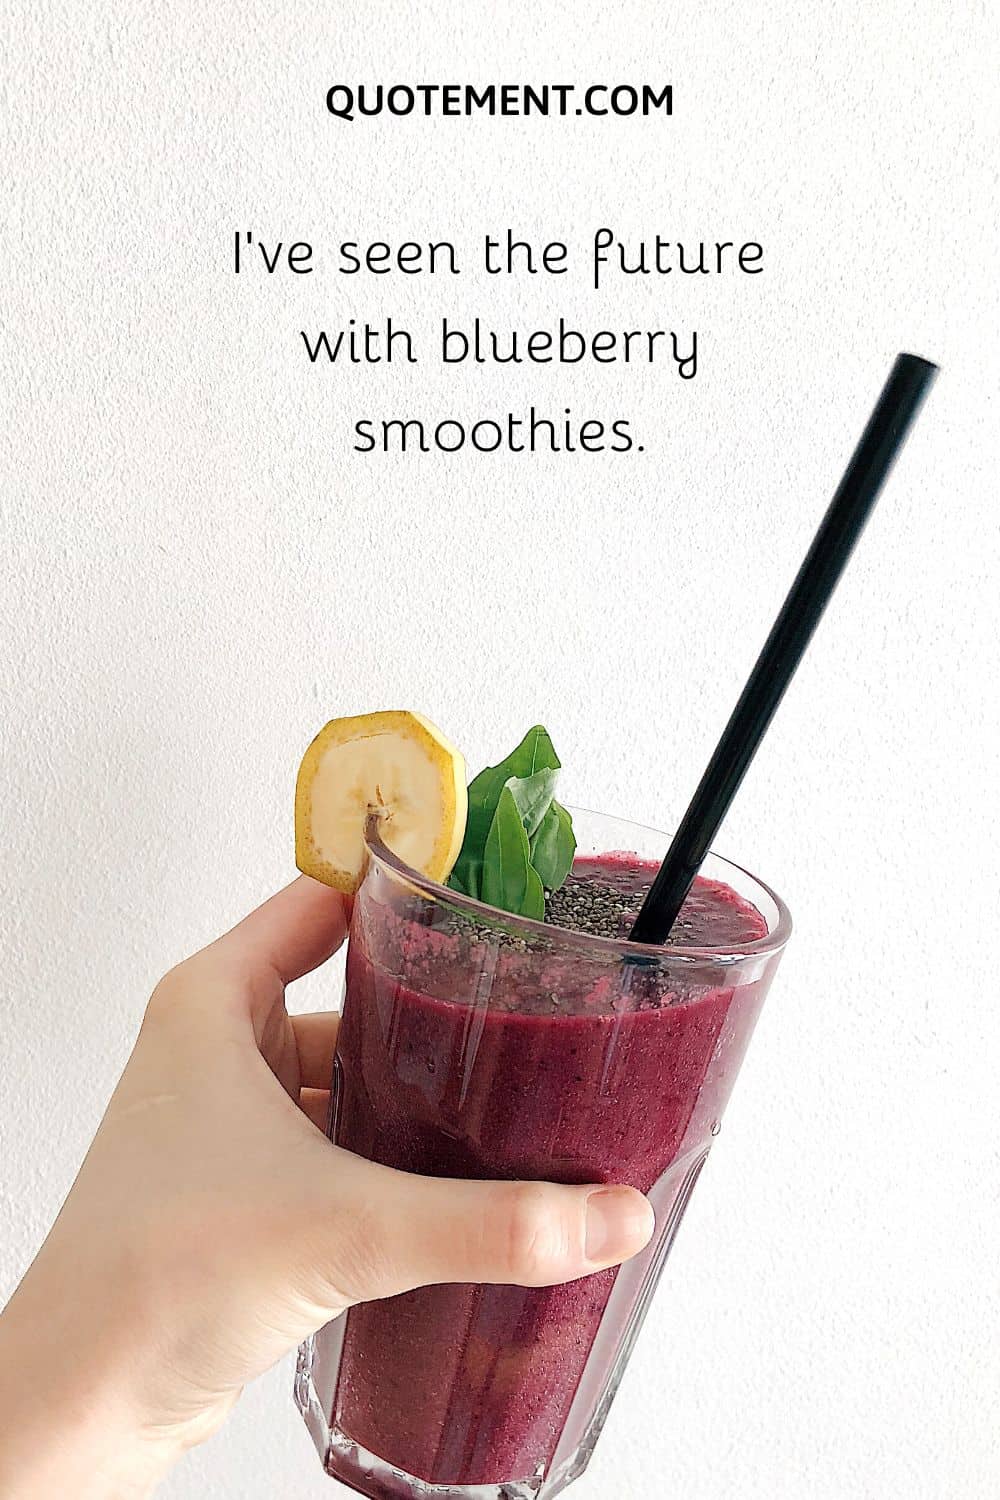 I’ve seen the future with blueberry smoothies.